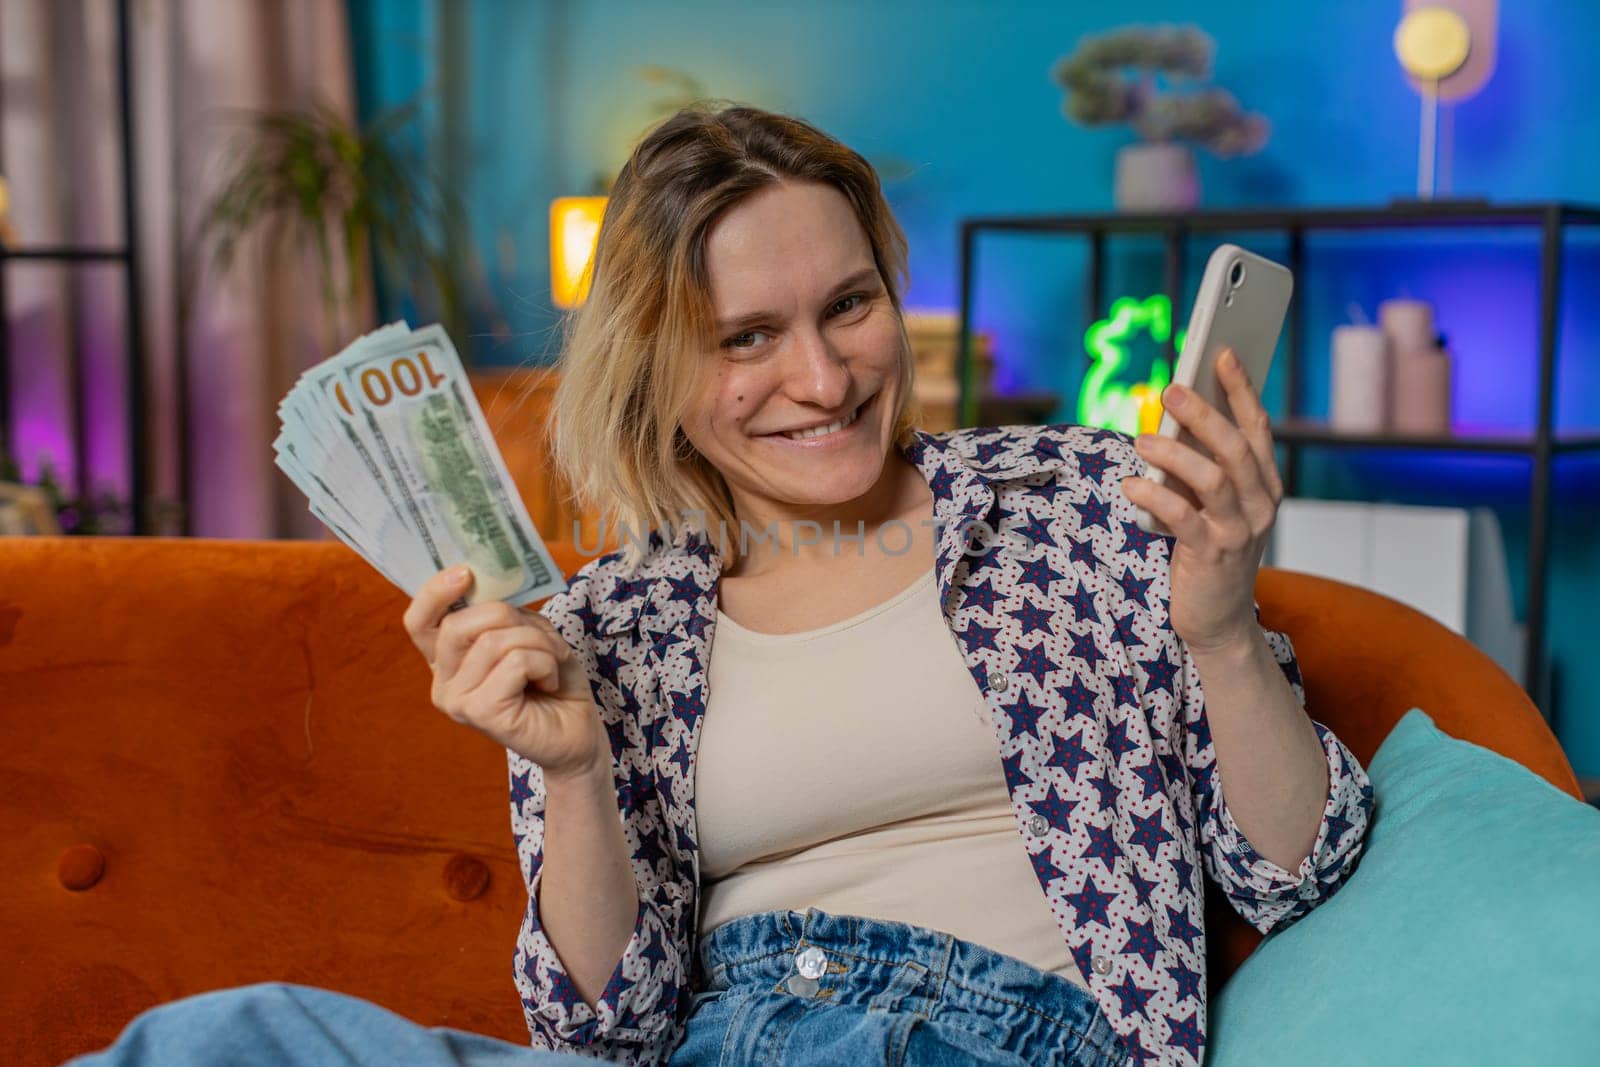 Successful rich smiling woman holding smartphone and waving dollar bill money fan sitting on sofa at home. Happy Caucasian girl winning online lottery game planning vacation calculating budget concept